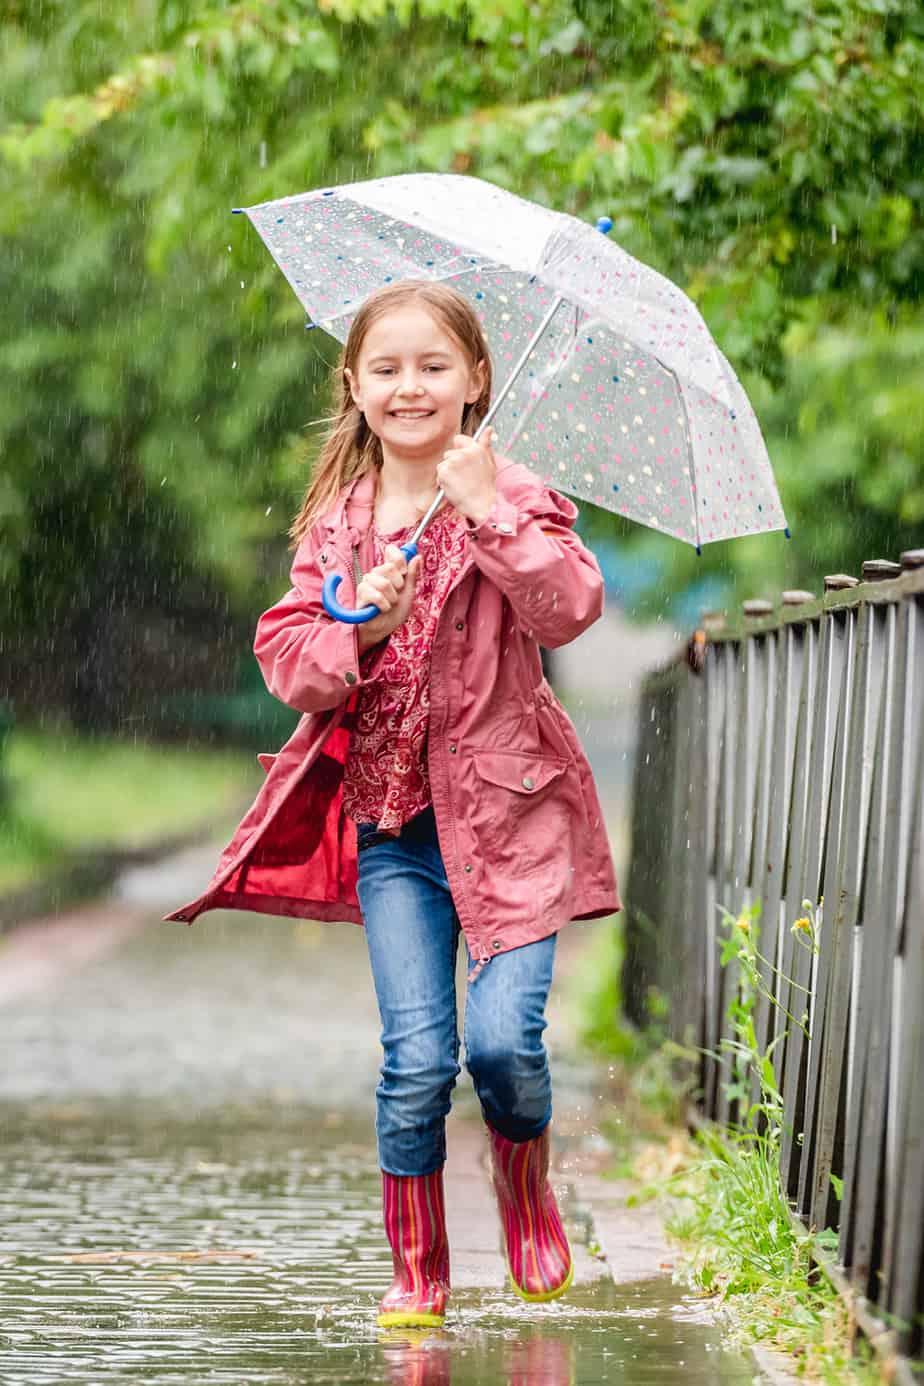 Girl with umbrella laughs jumping in spring puddles